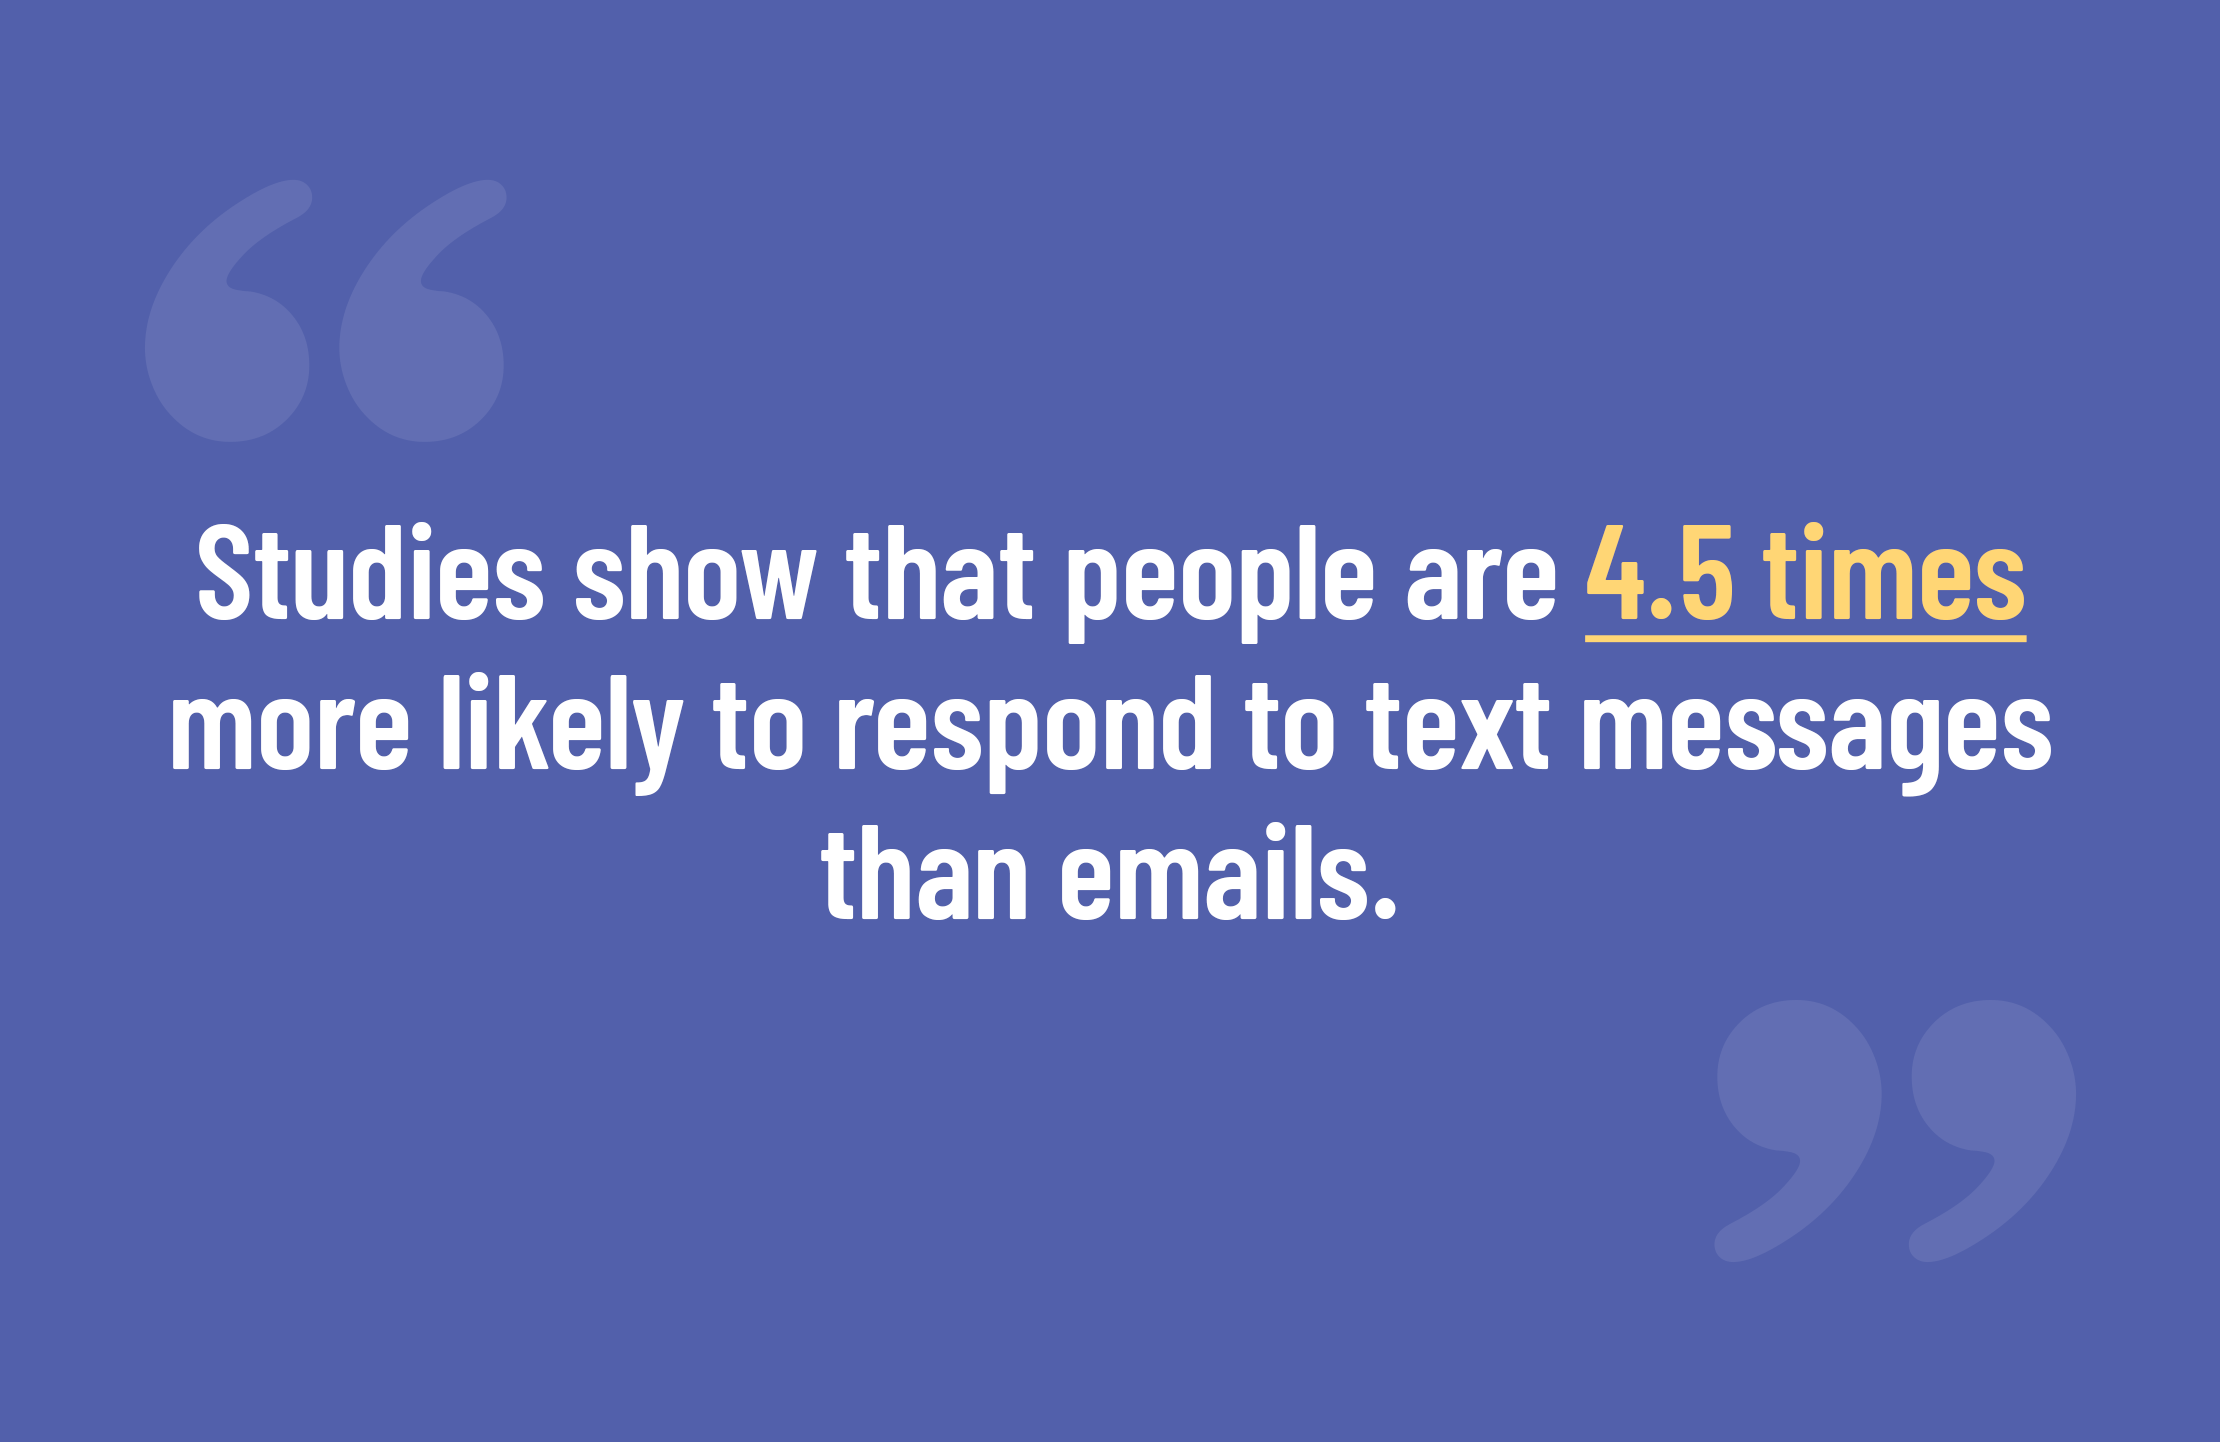 Studies show that people are 4.5 times more likely to respond to text messages than emails